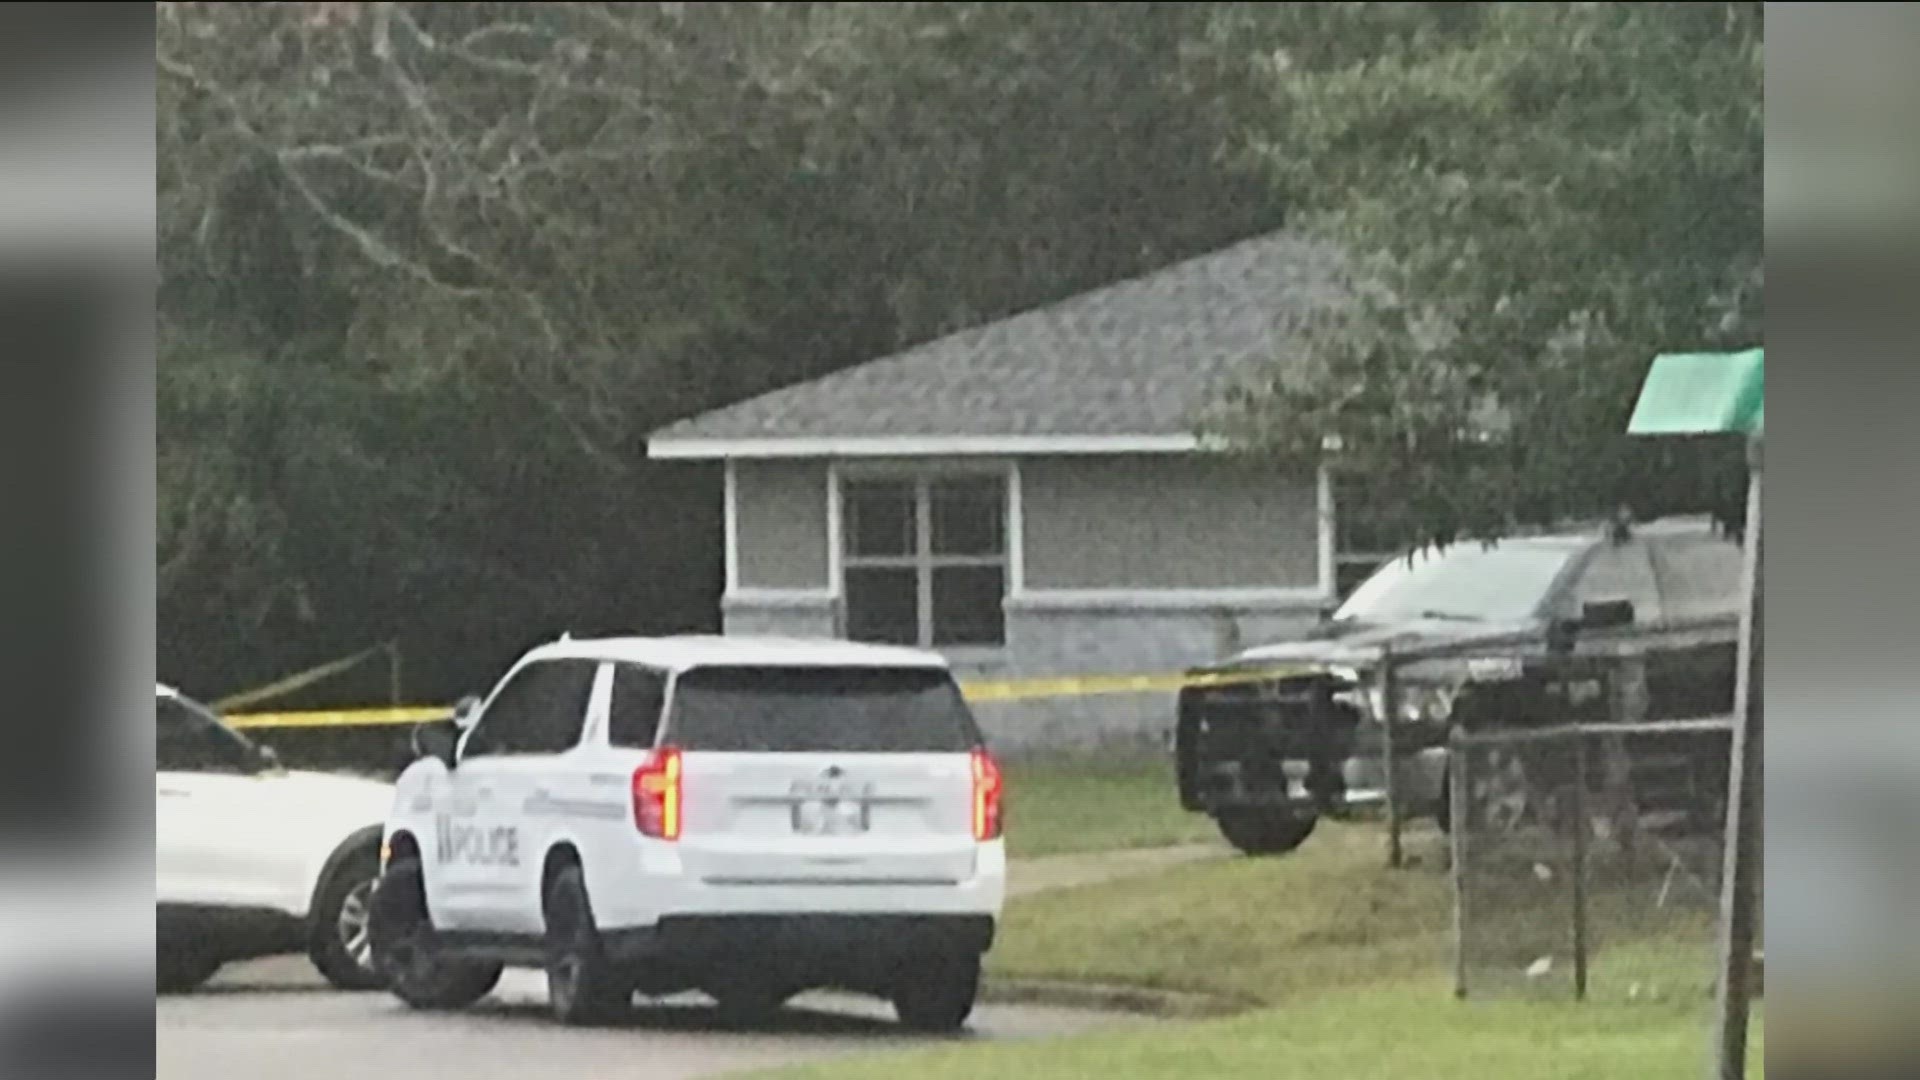 Both the Roland Police Department and OSBI are investigating the death.